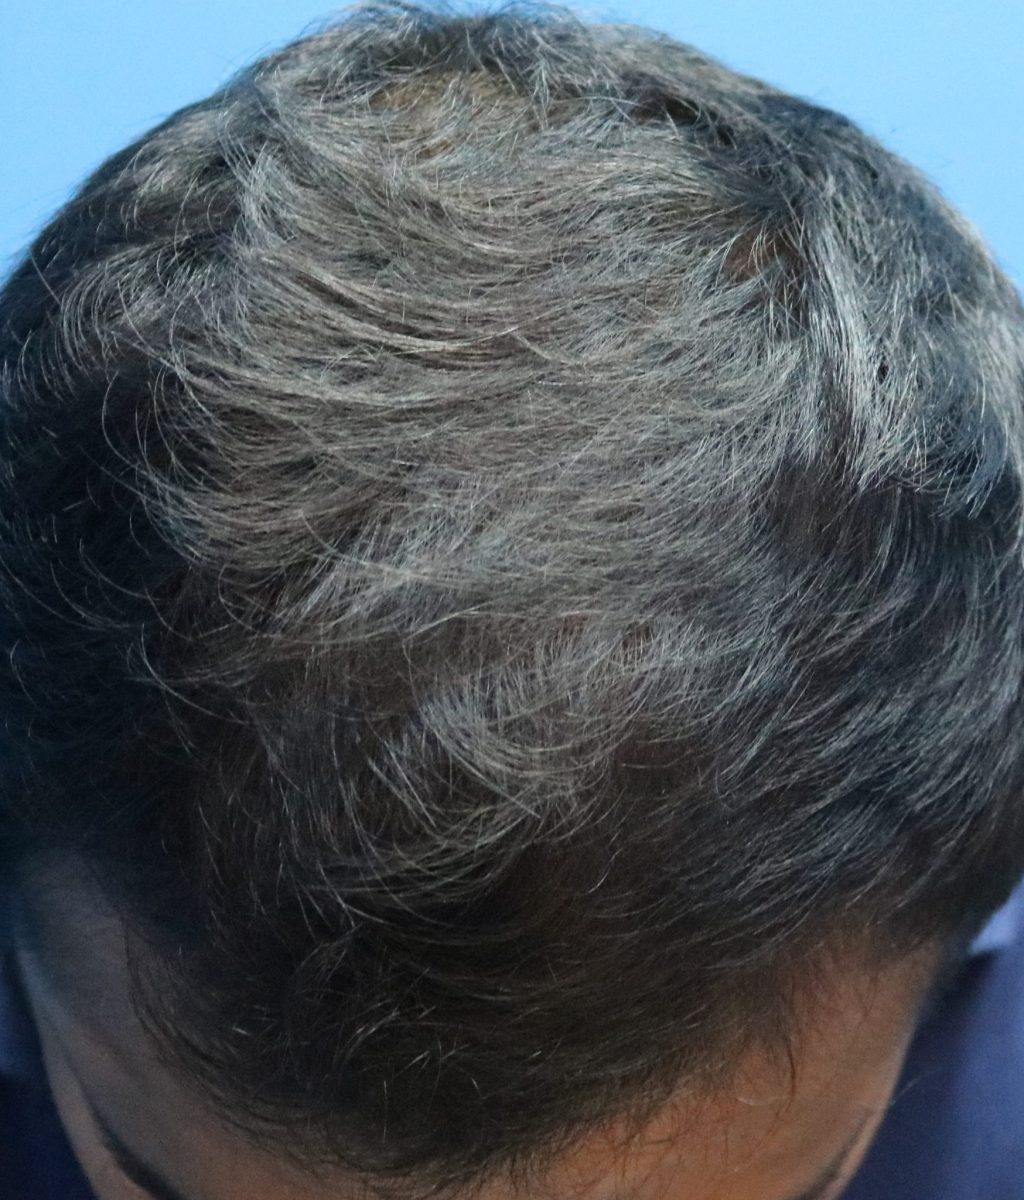 Fue Hair Transplant of 14 Month